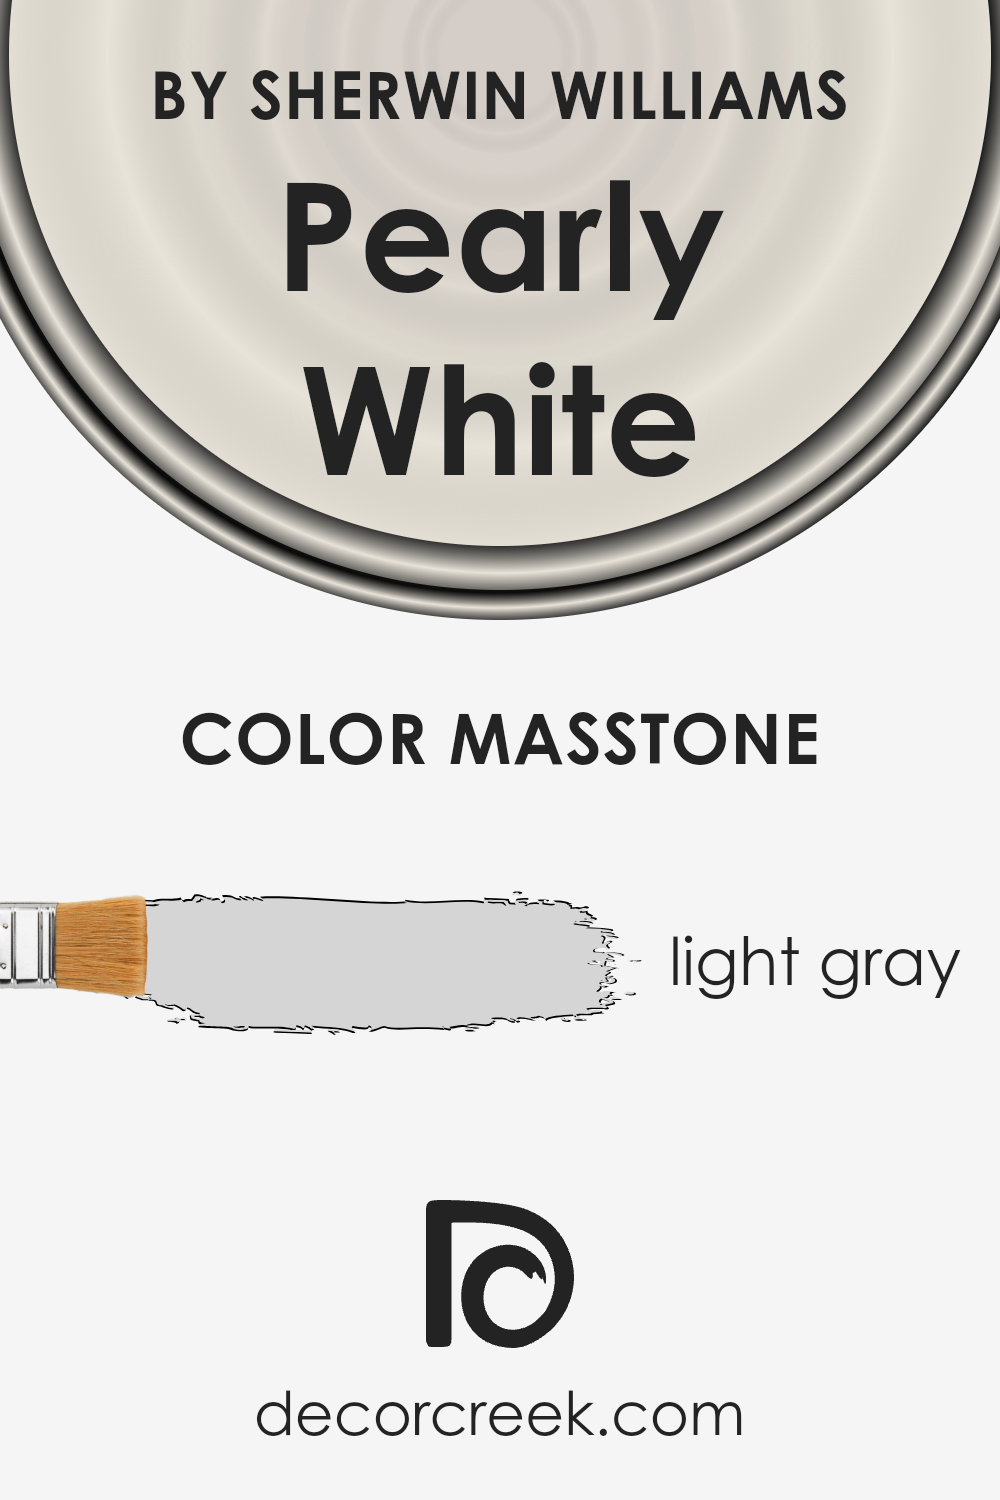 what_is_the_masstone_of_pearly_white_sw_7009